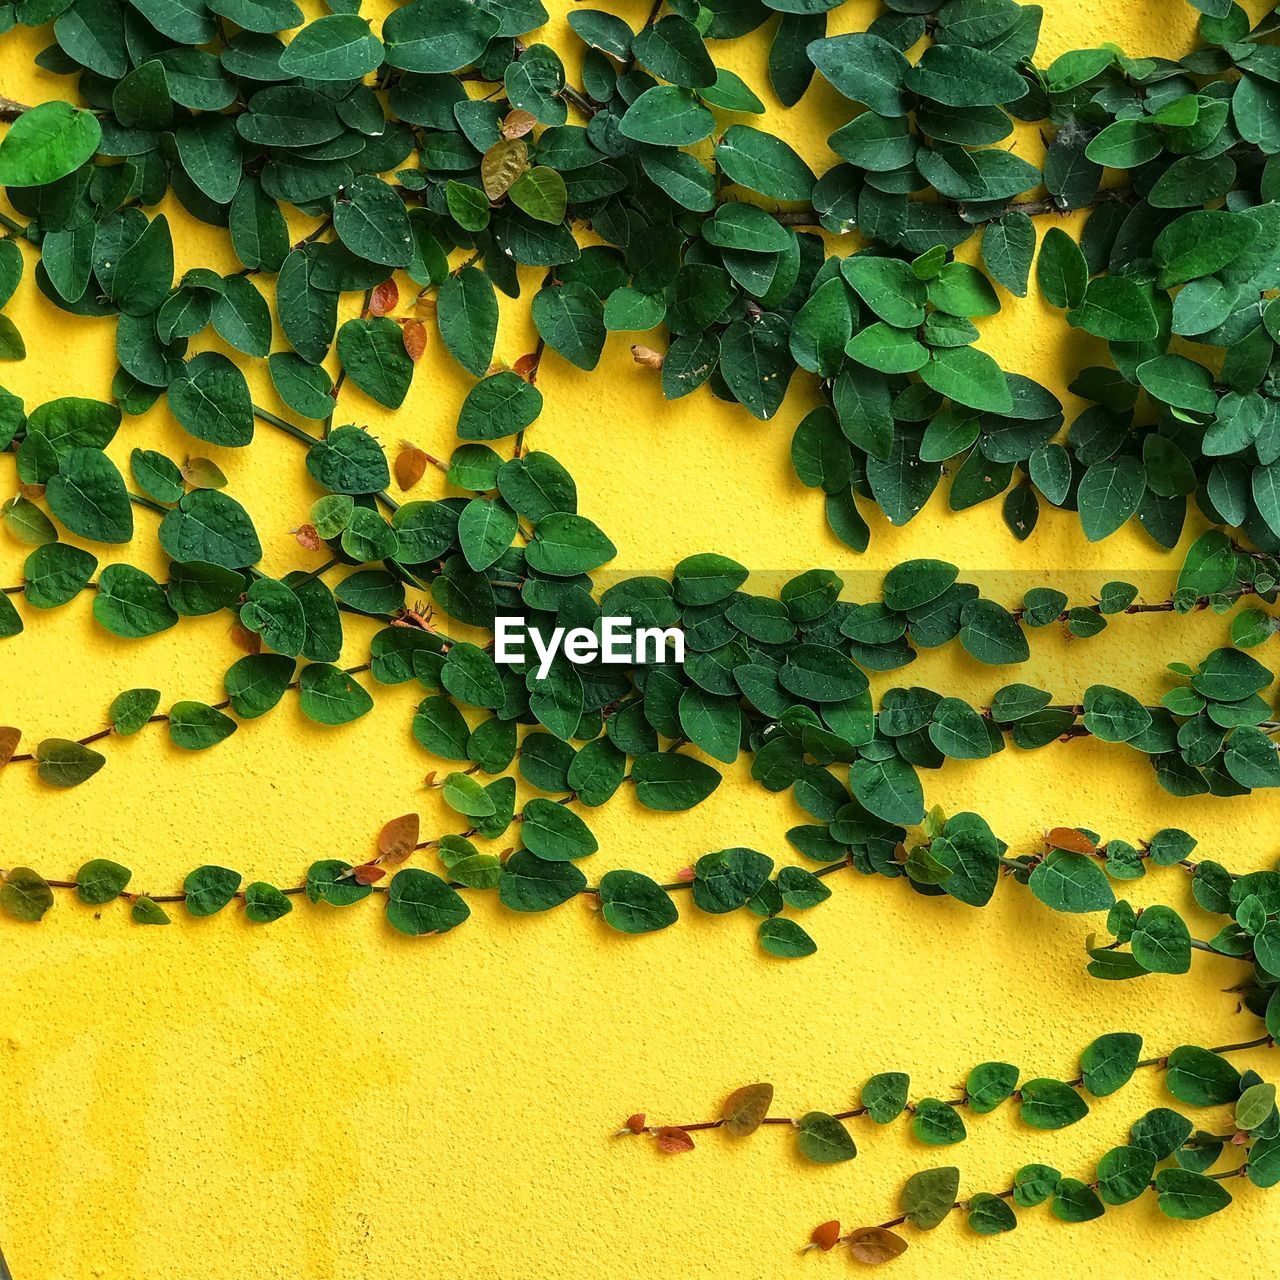 CLOSE-UP OF YELLOW LEAVES ON WALL